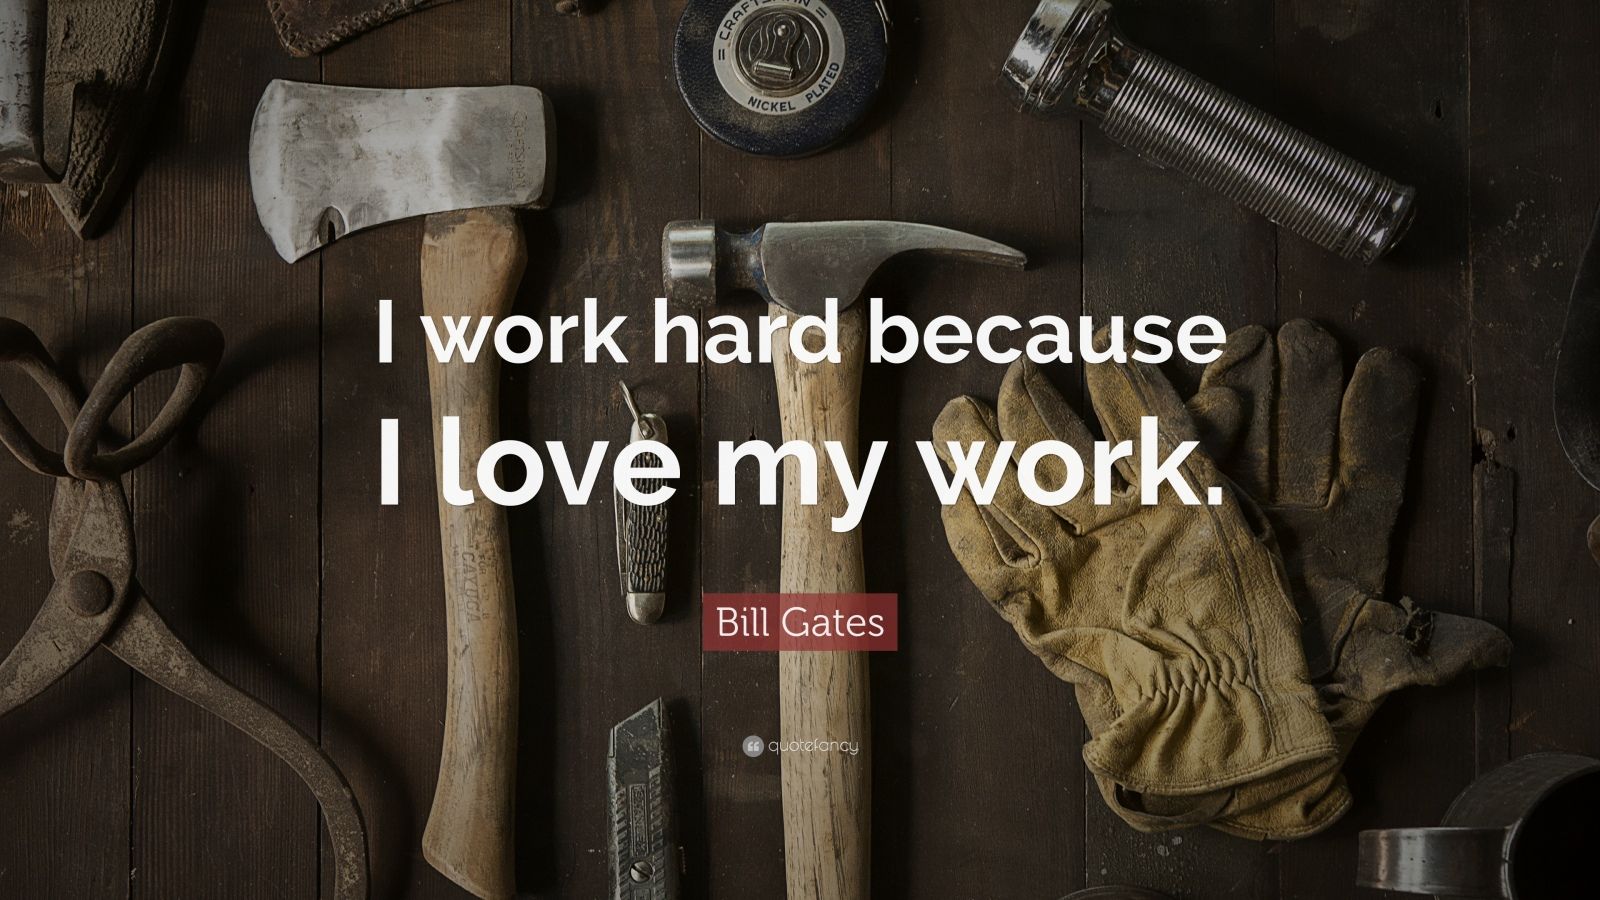 Bill Gates Funny Quotes Hard Work Quotes 40 wallpapers Quotefancy